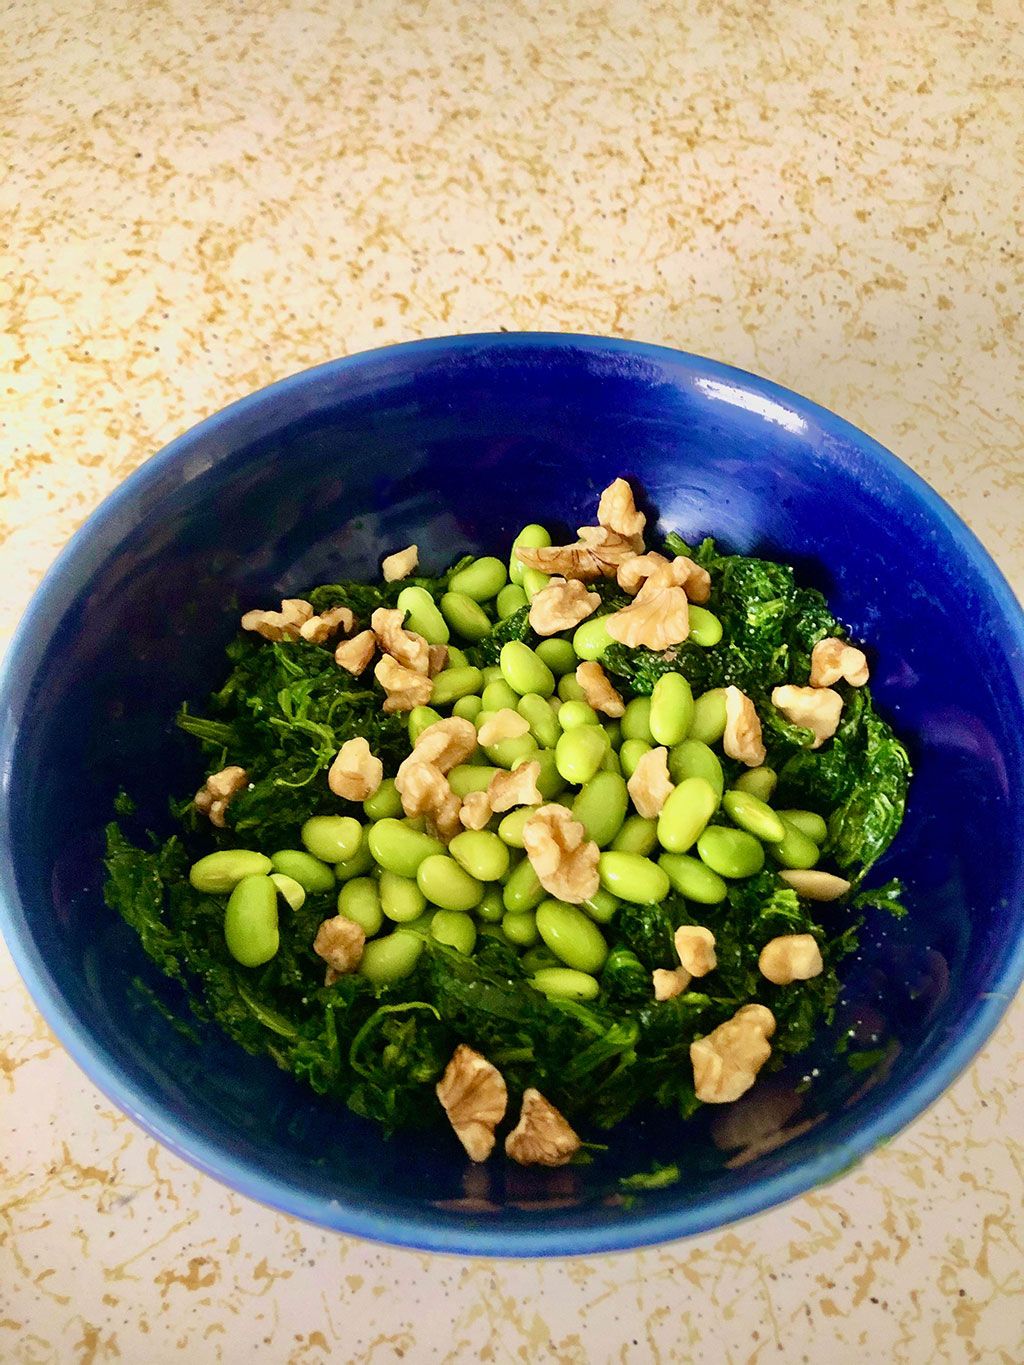 Soybean and spinach breakfast with walnuts